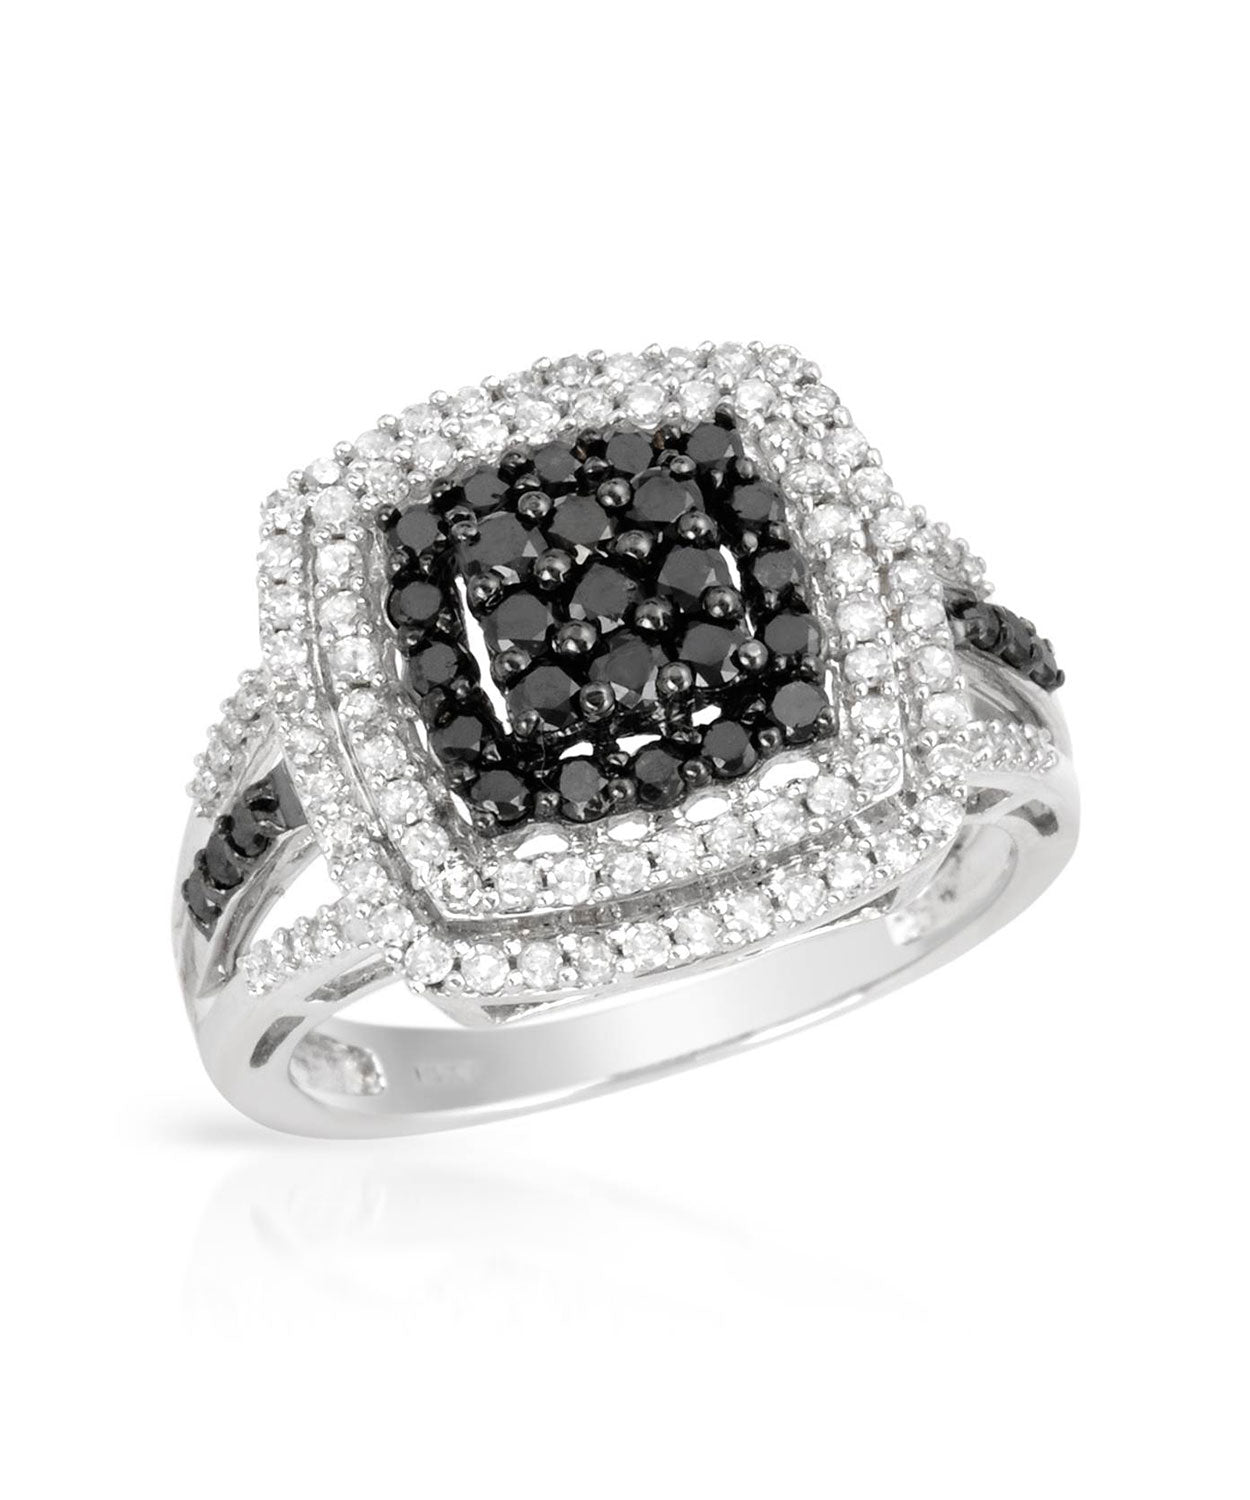 Black & White Collection 0.90 ctw Diamonds 14k White Gold Right Hand Ring View 1